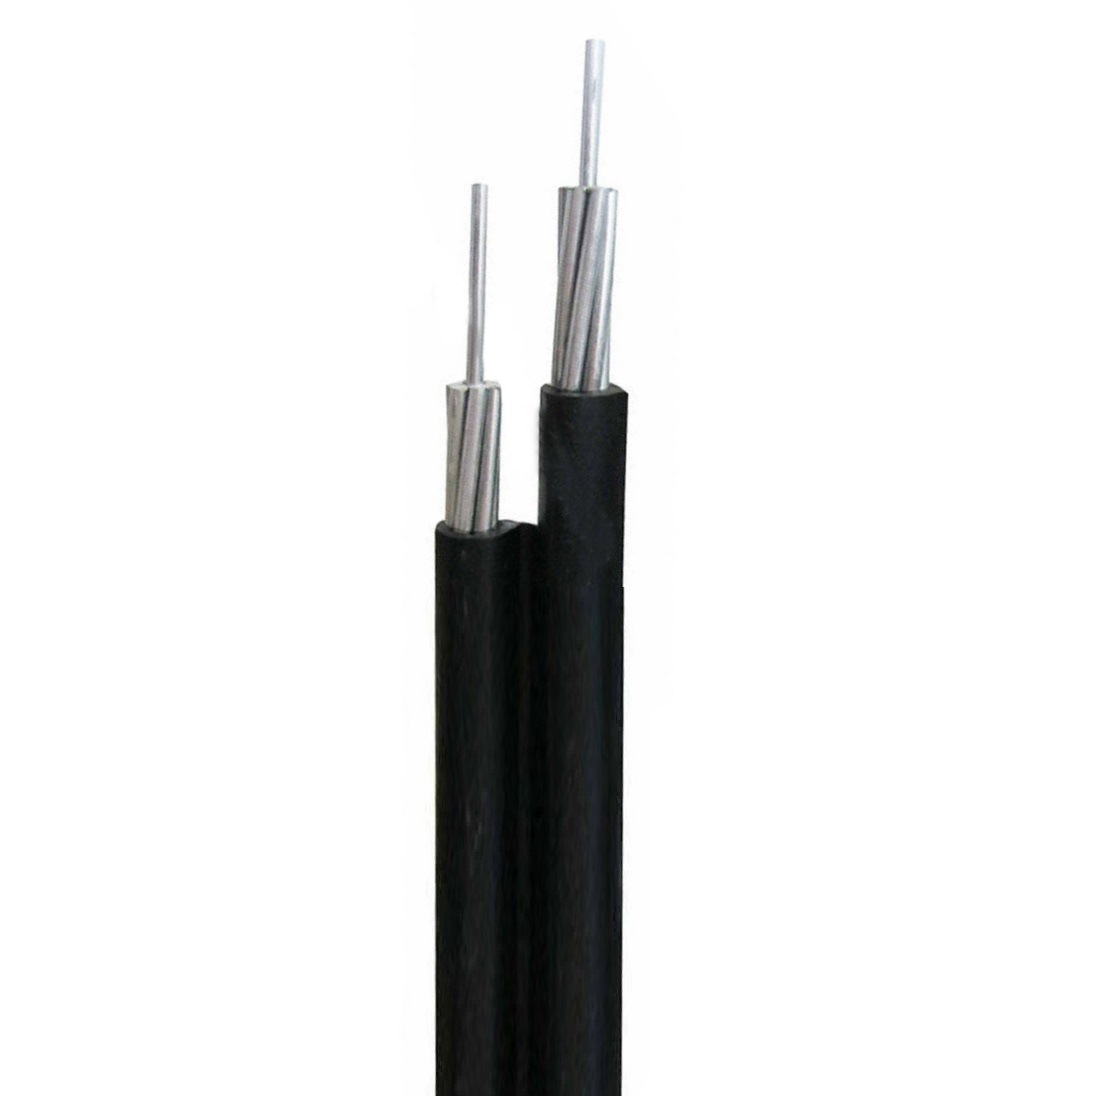 600 to 1000V PVC Covered Conductor Twin 16mm2 7X1.7mm AAC/PVC Cable